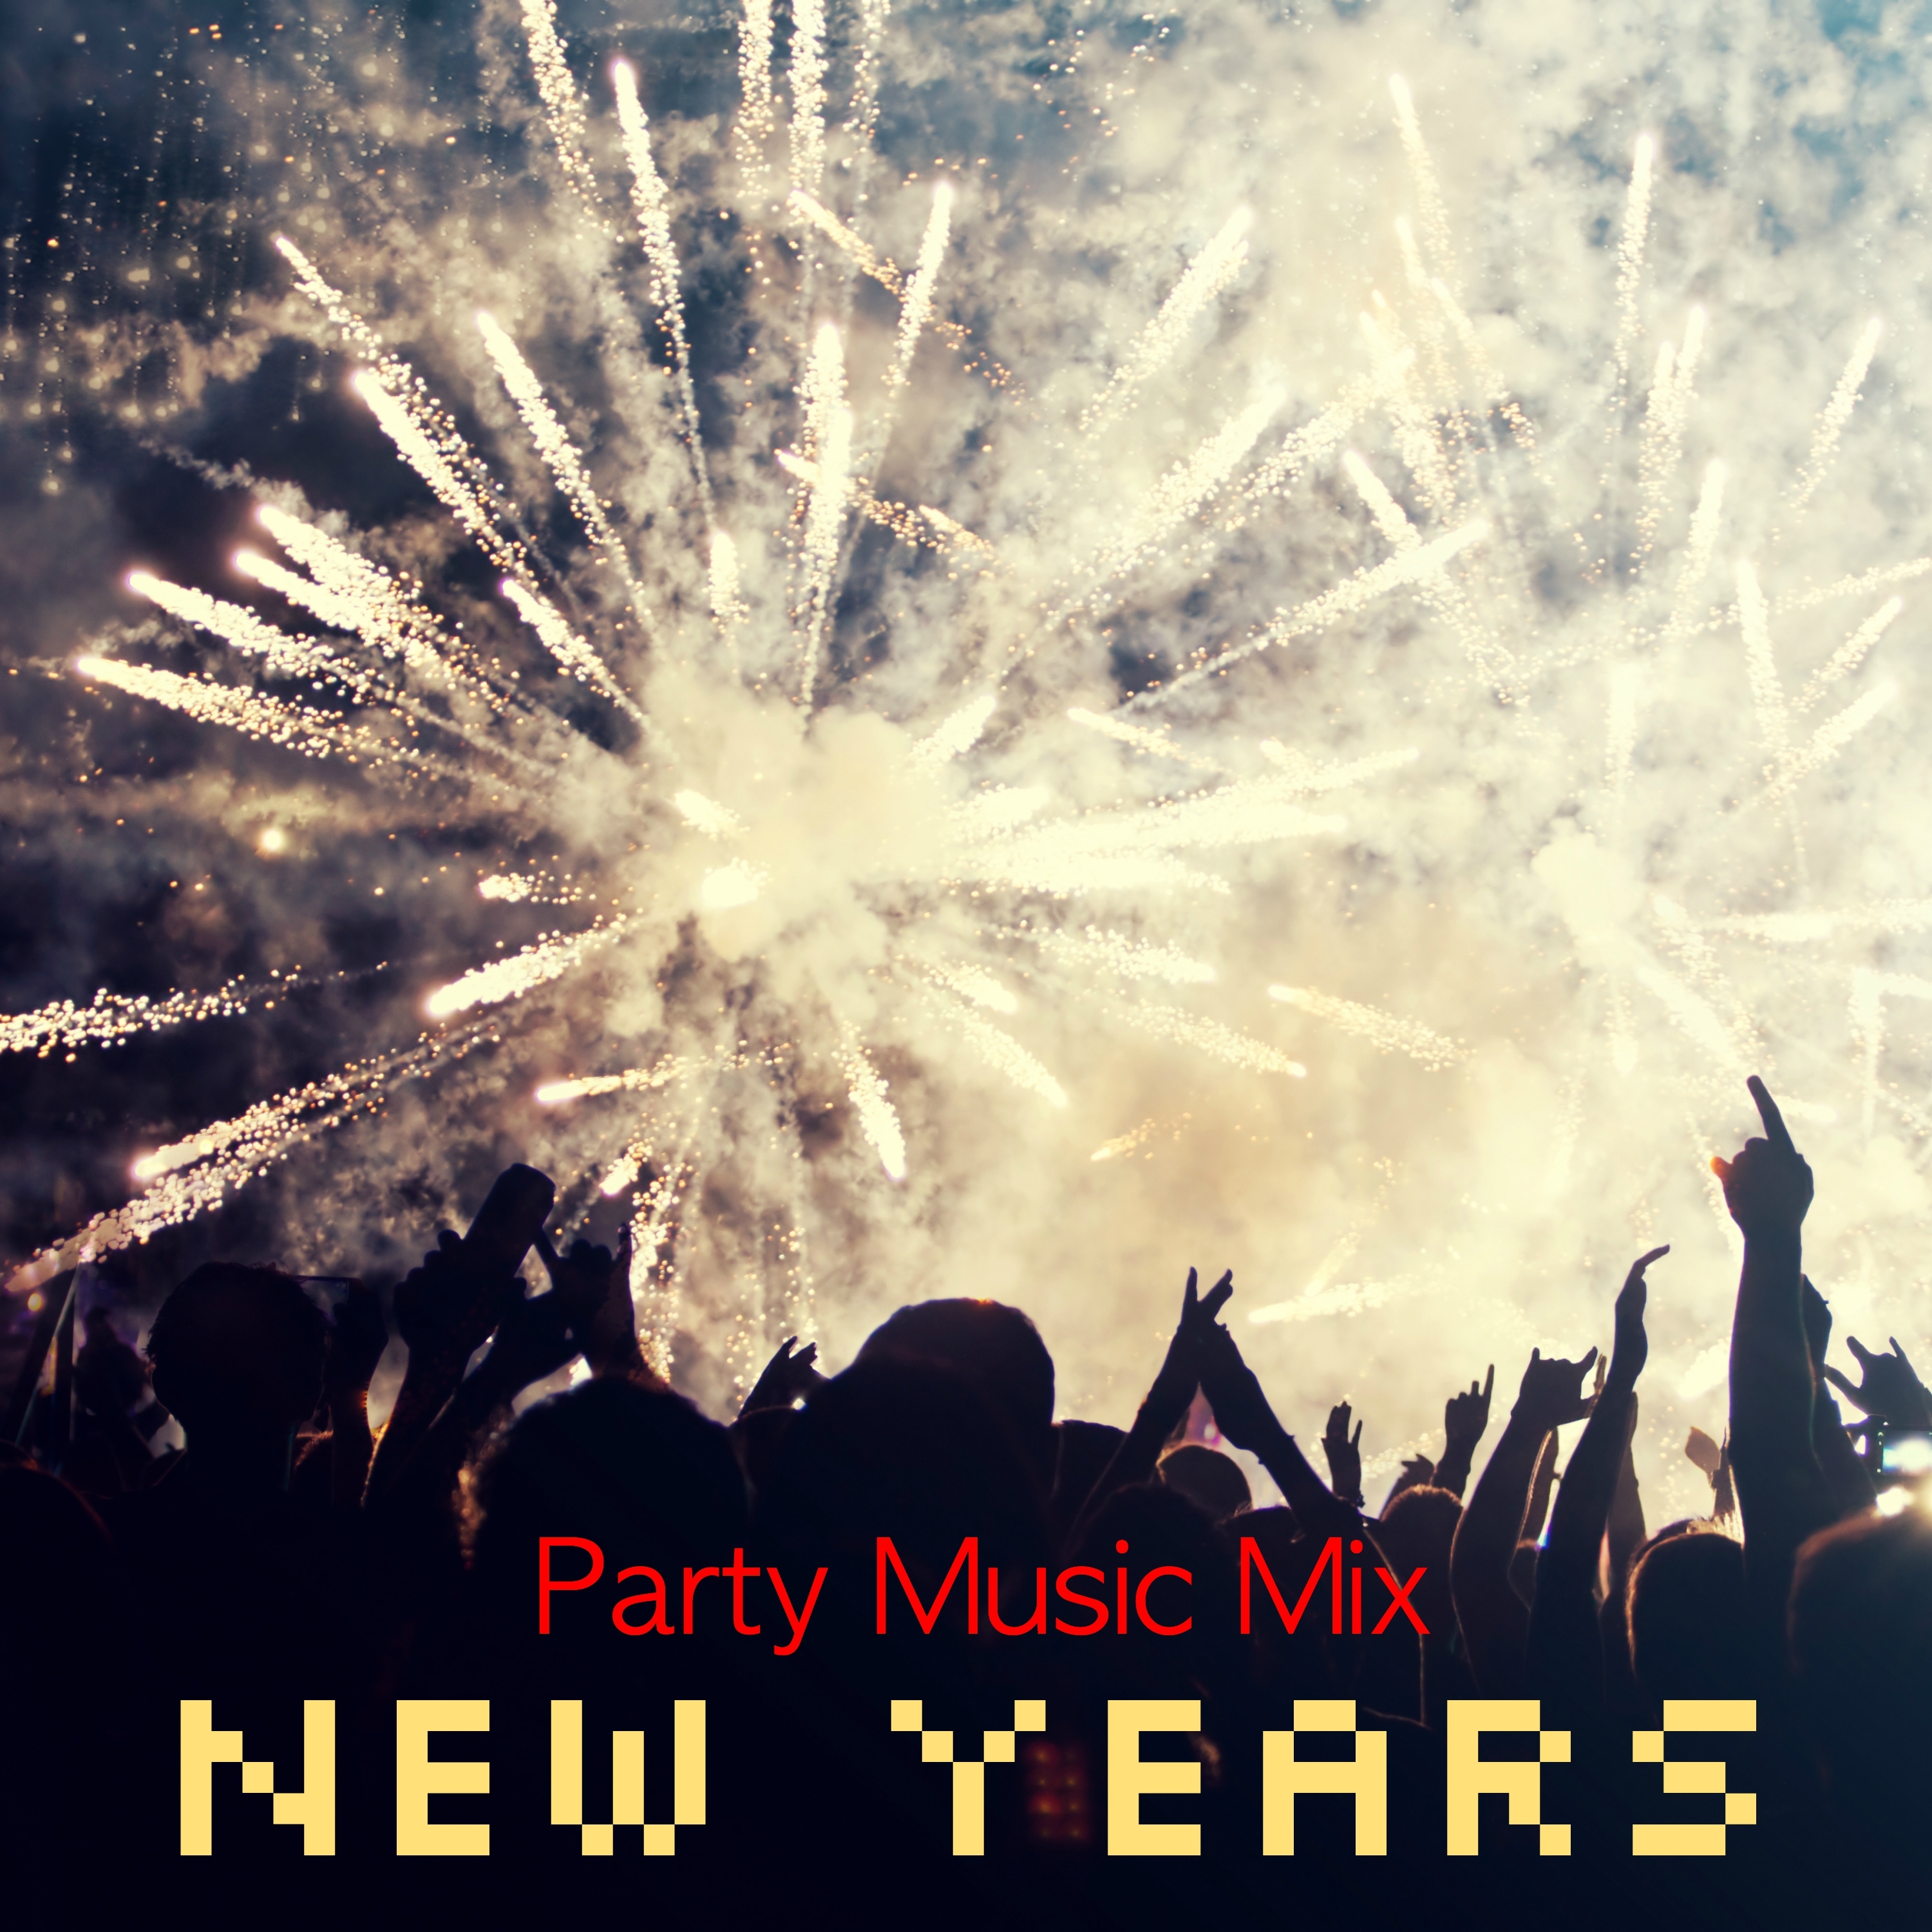 New Years Party Music Mix  Electronic Music, EDM  House Music for Happy New Year Night Party